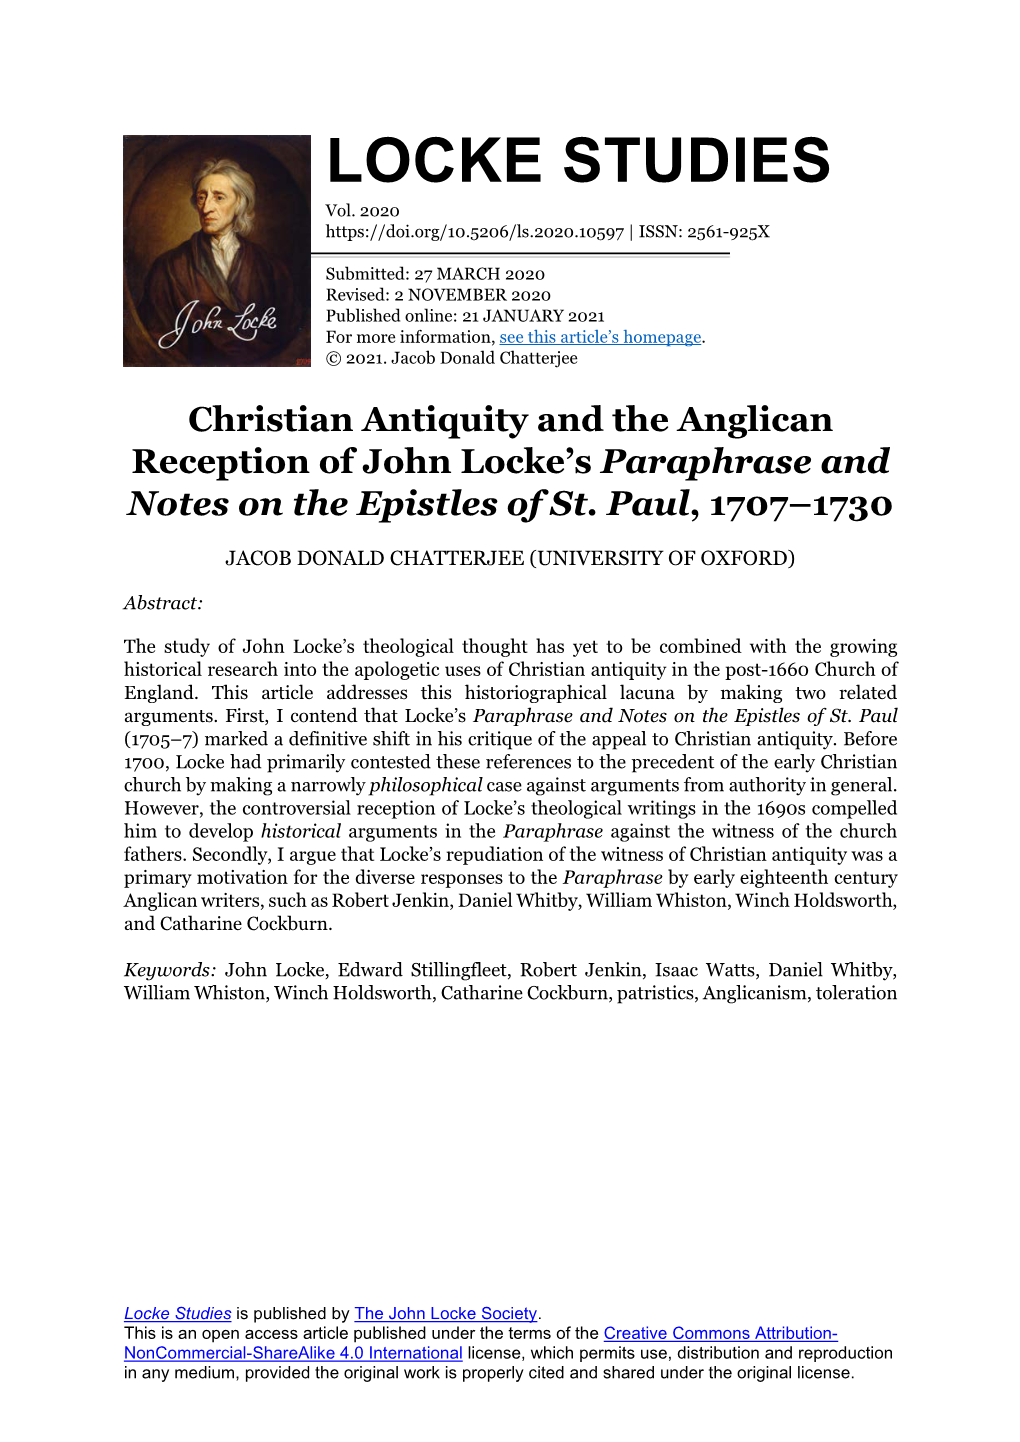 Christian Antiquity and the Anglican Reception of John Locke’S Paraphrase and Notes on the Epistles of St